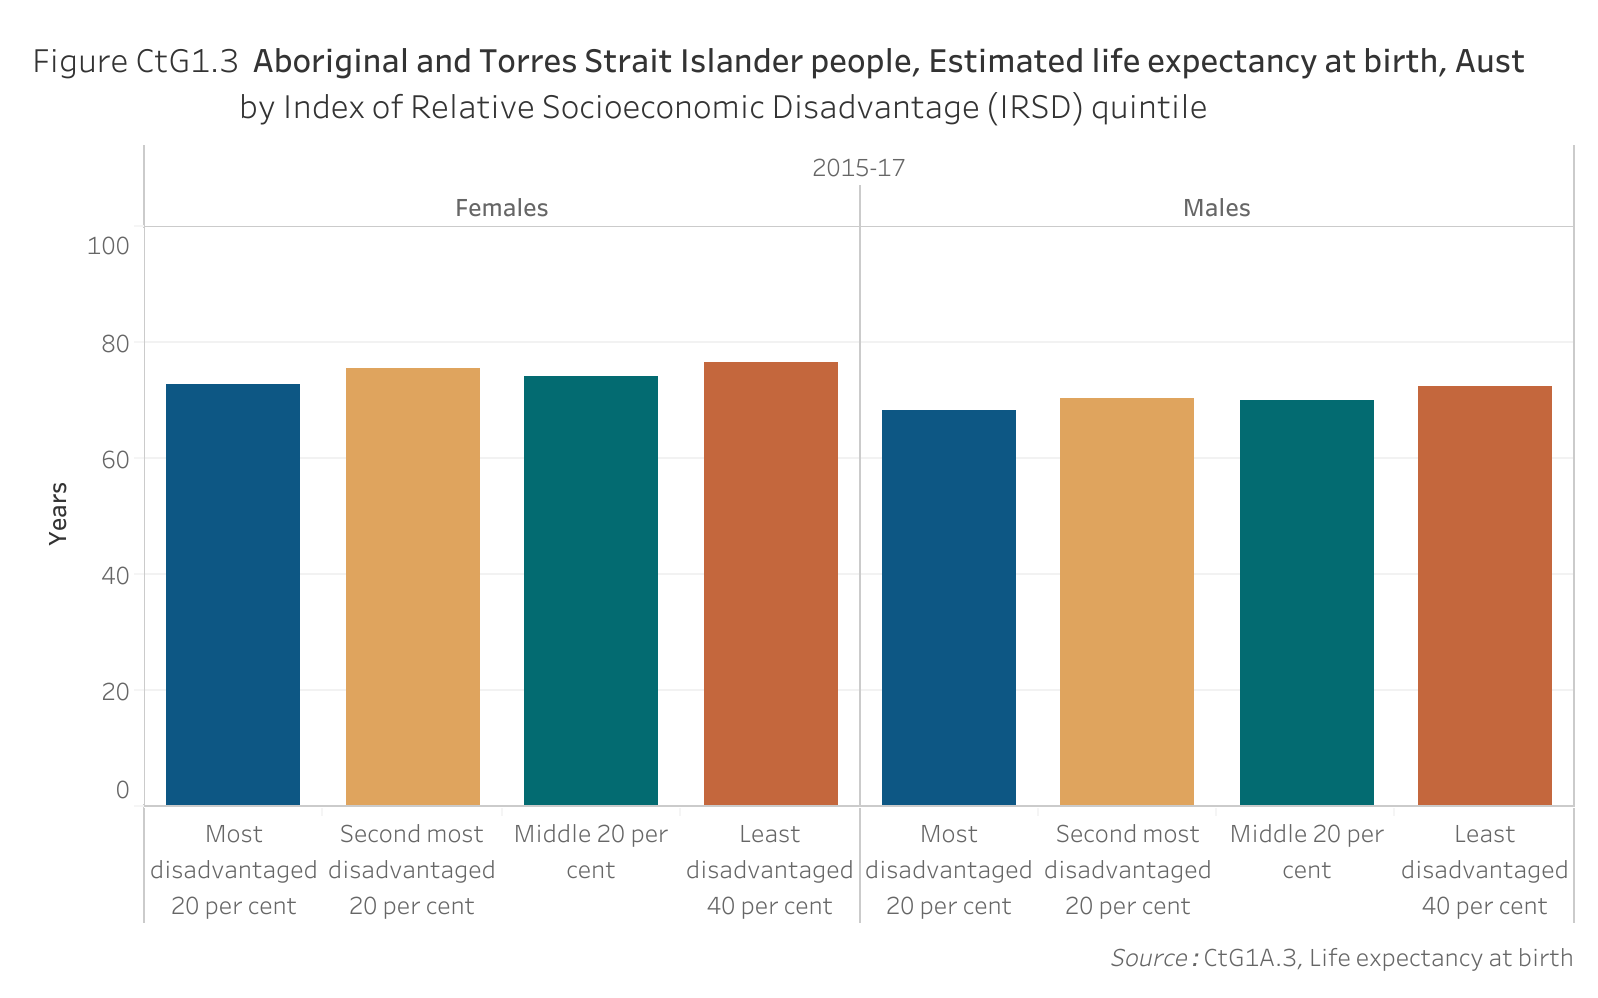 Figure CtG1.3. Bar chart showing the estimated life expectancy at birth of Aboriginal and Torres Strait Islander people in Australia in 2015-17, by sex and by Index of Relative Socioeconomic Disadvantage (IRSD) quintile. Data table of figure CtG1.3 is below.